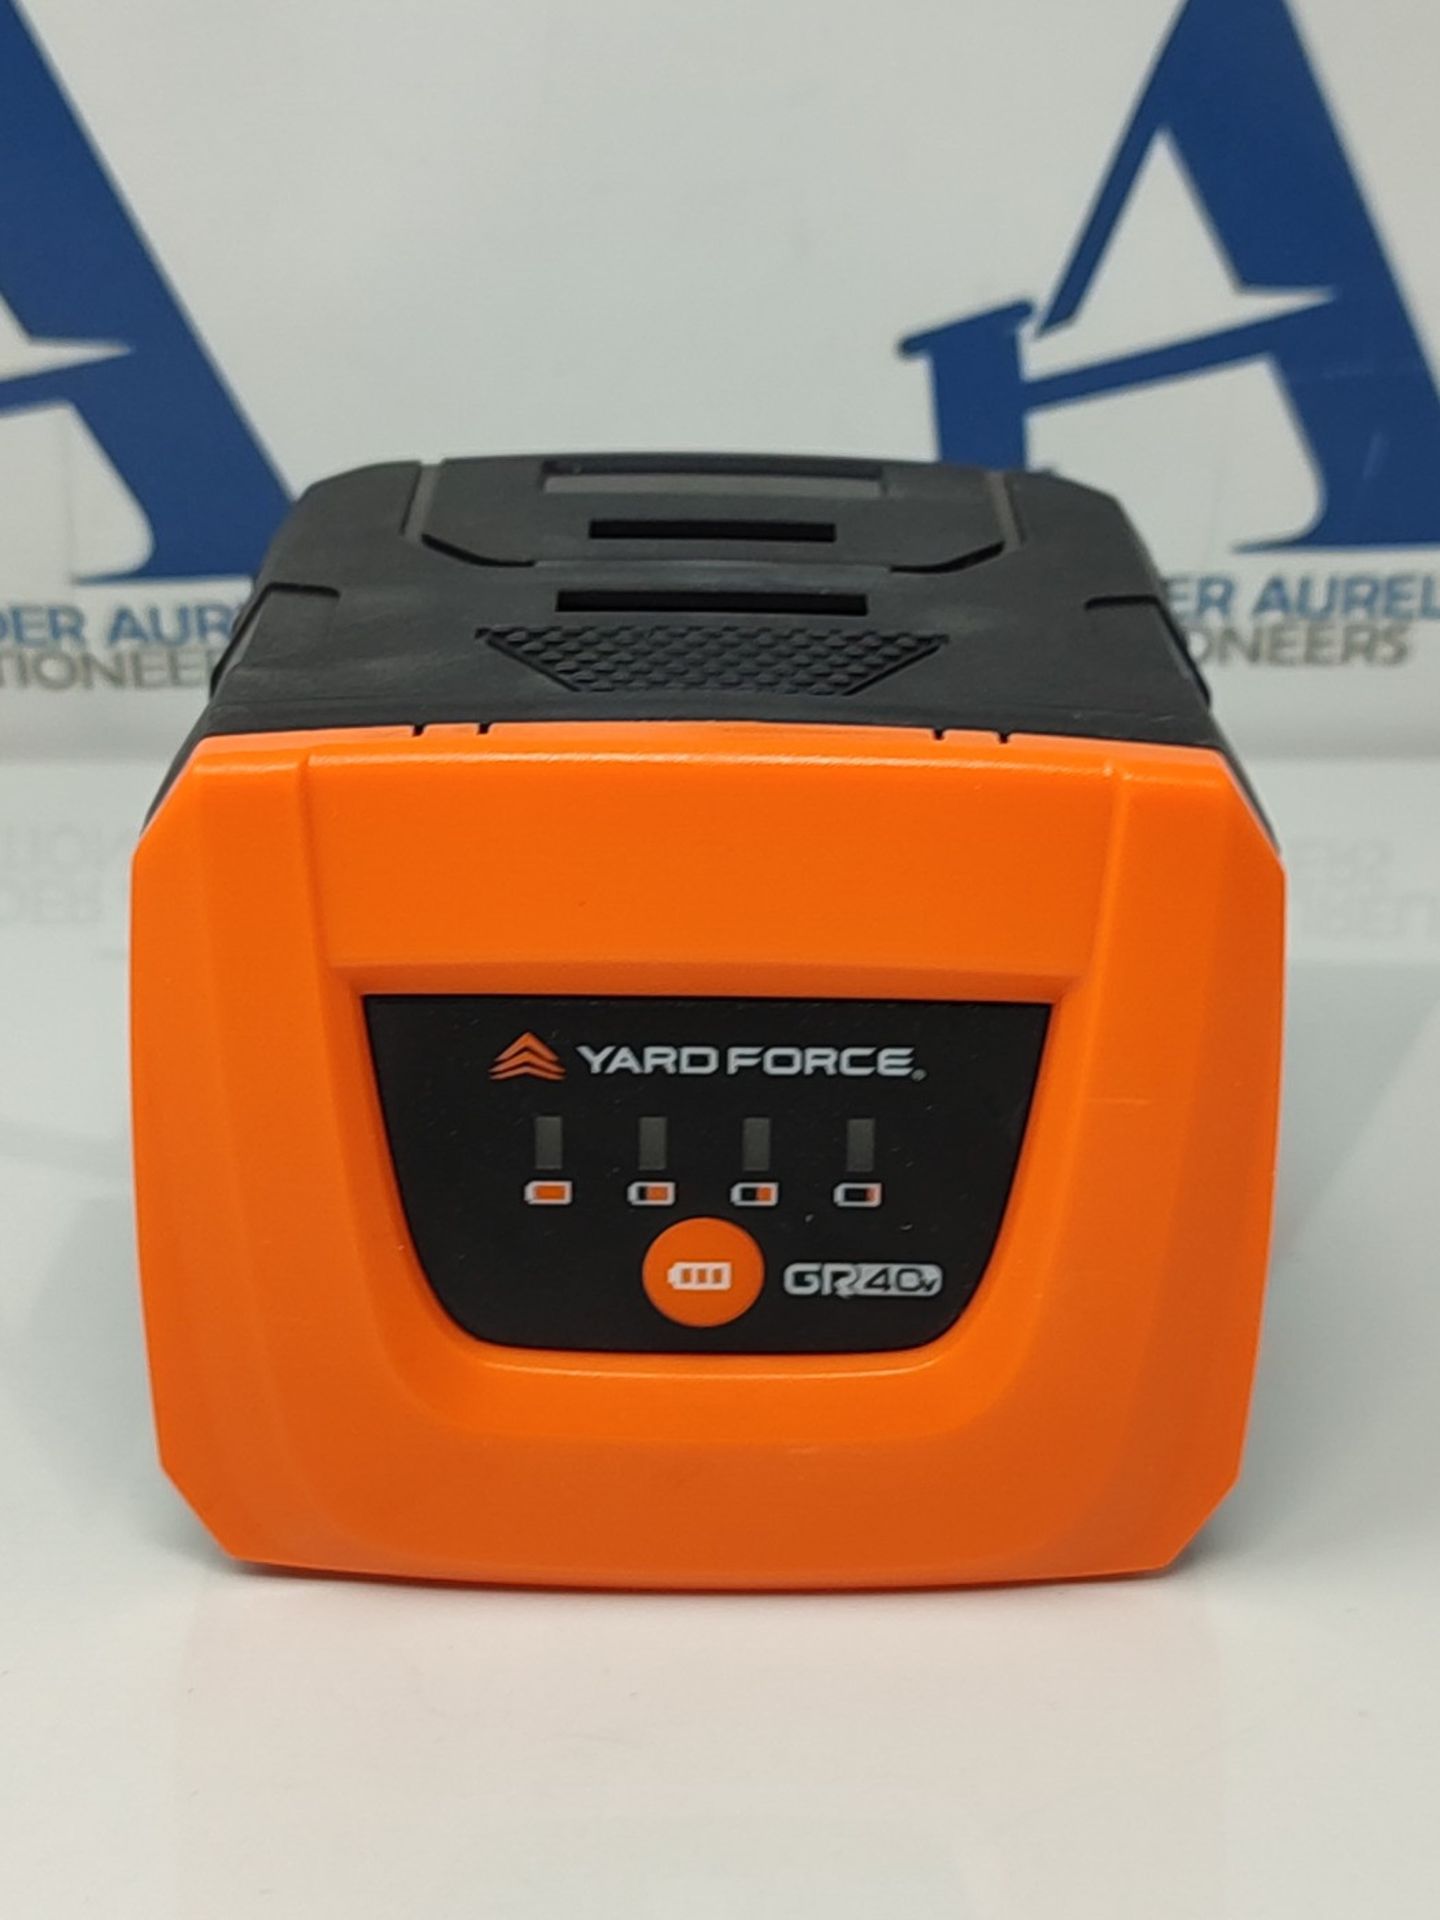 RRP £79.00 Yard Force Battery 40V 2.5Ah Lithium-Ion Battery for Garden Tools, with Overload Prote - Image 3 of 3